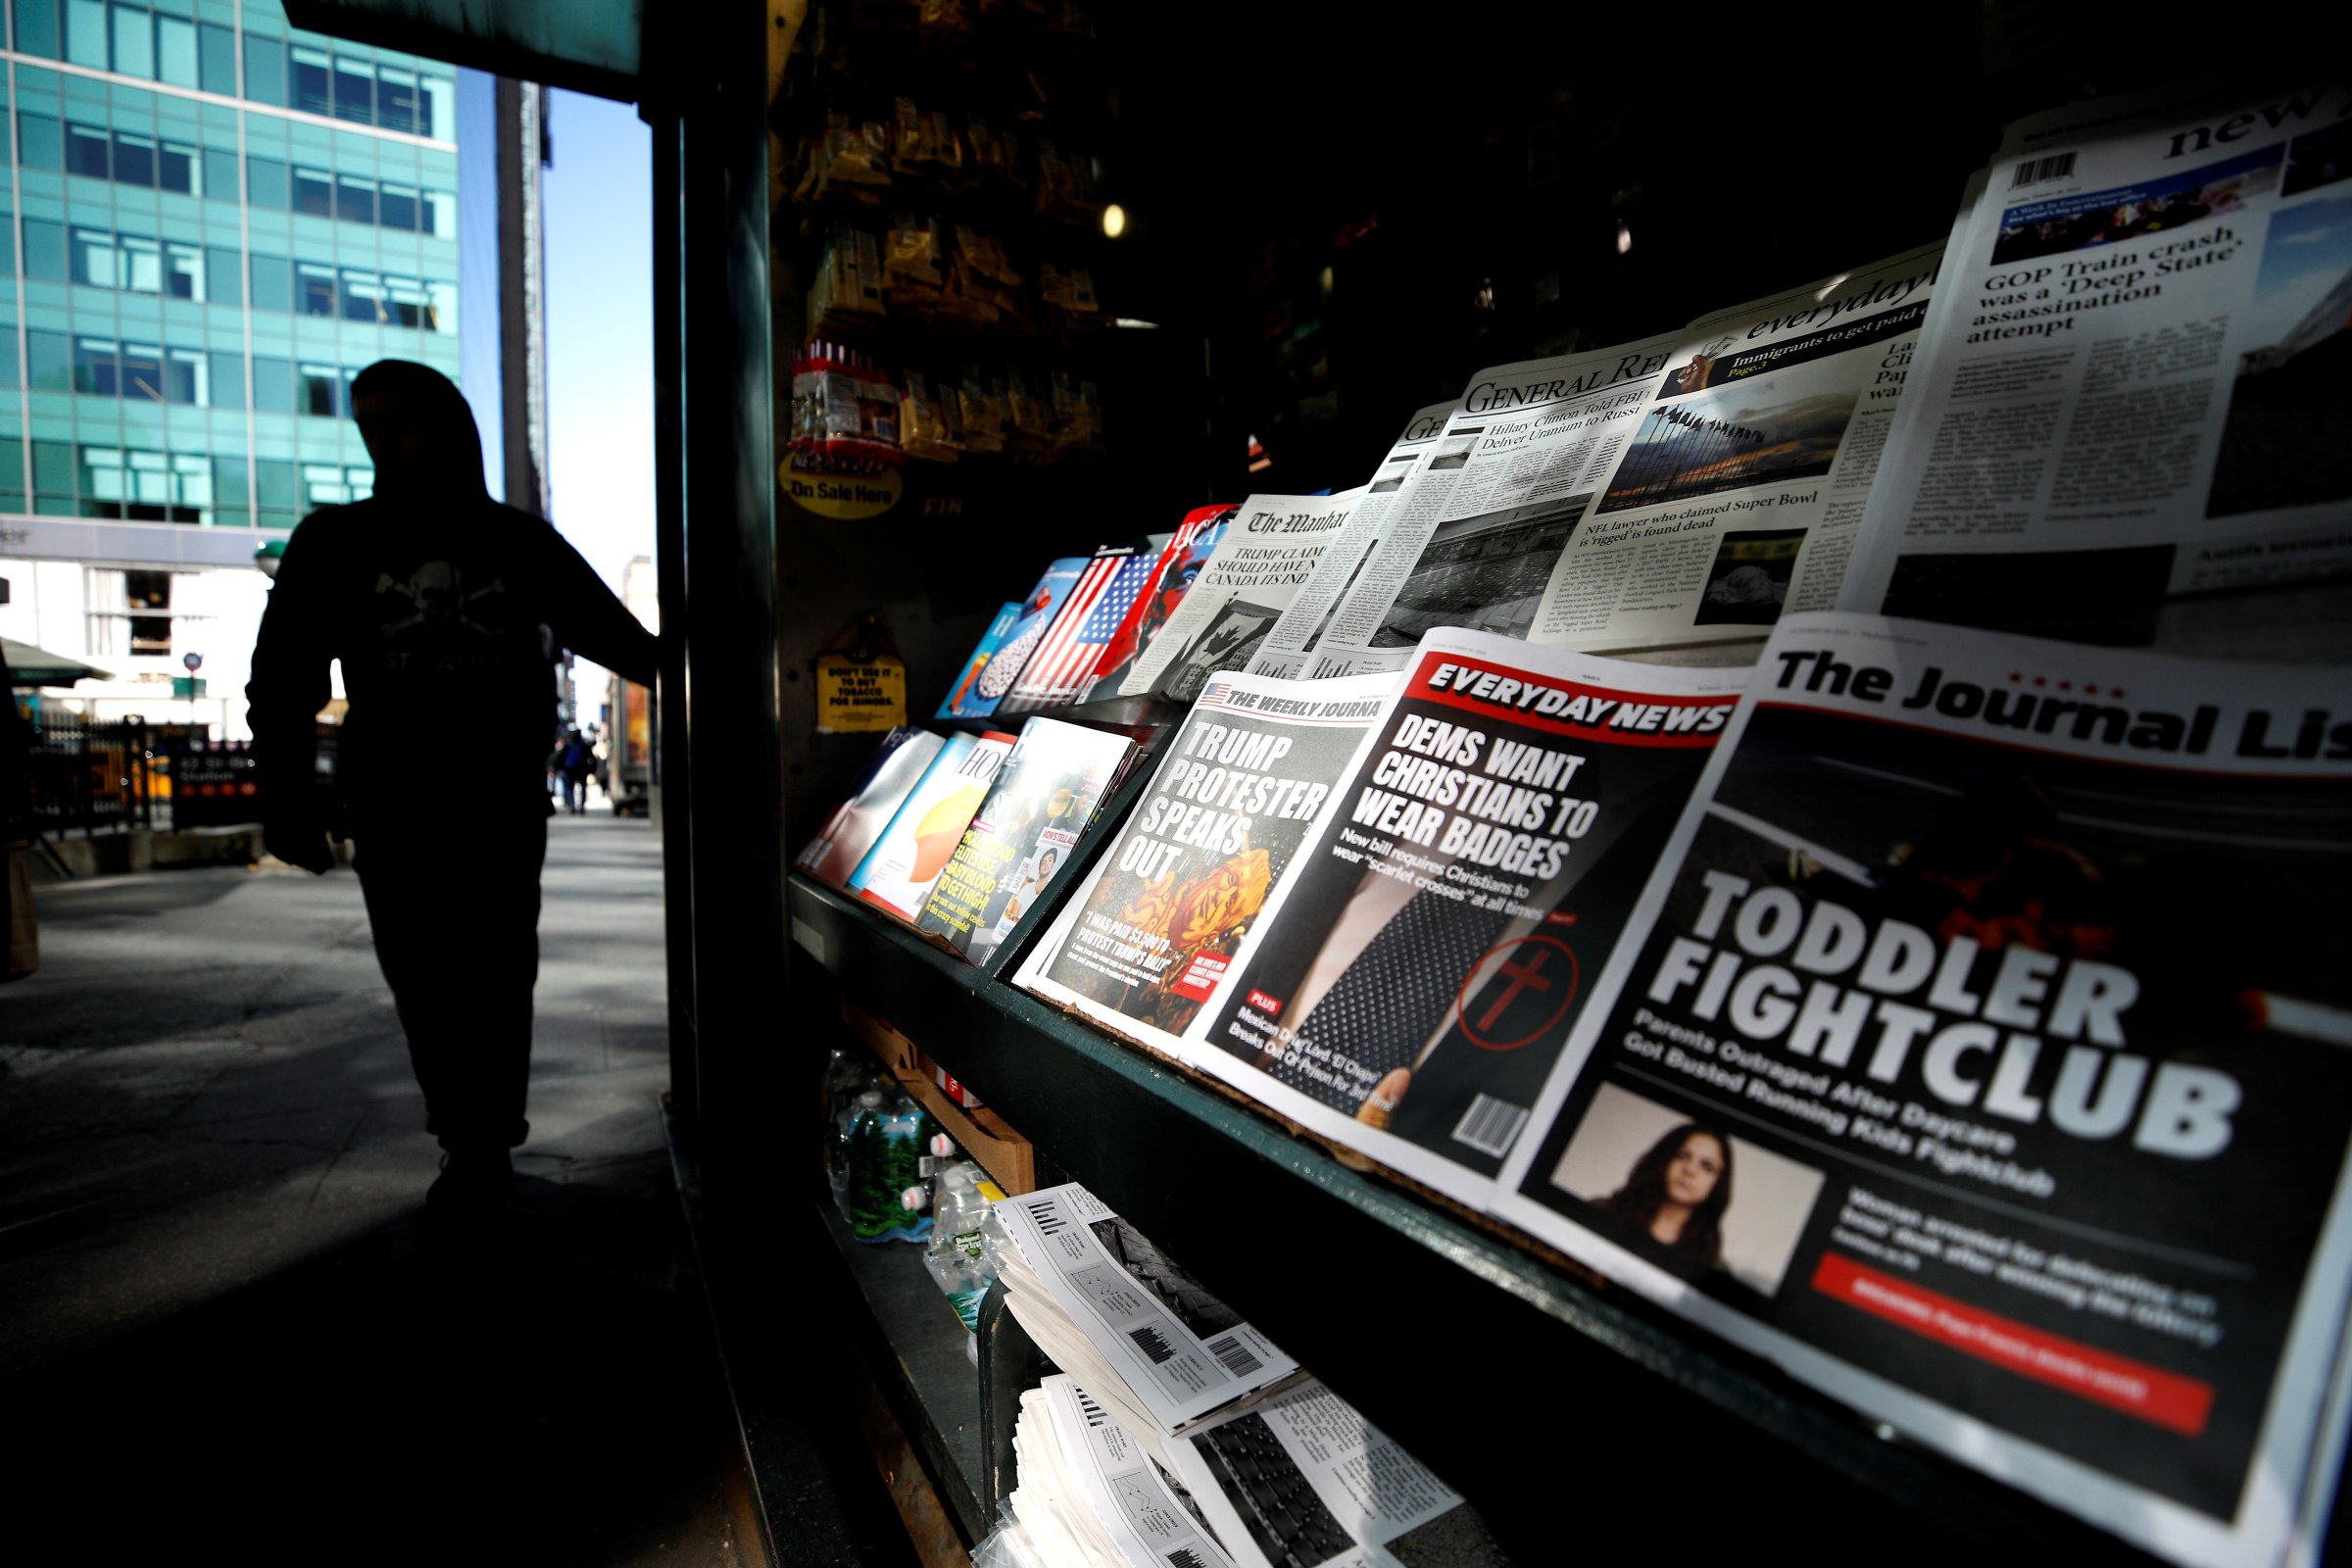 The Columbia Journalism Review's 'Misinformation news stand'